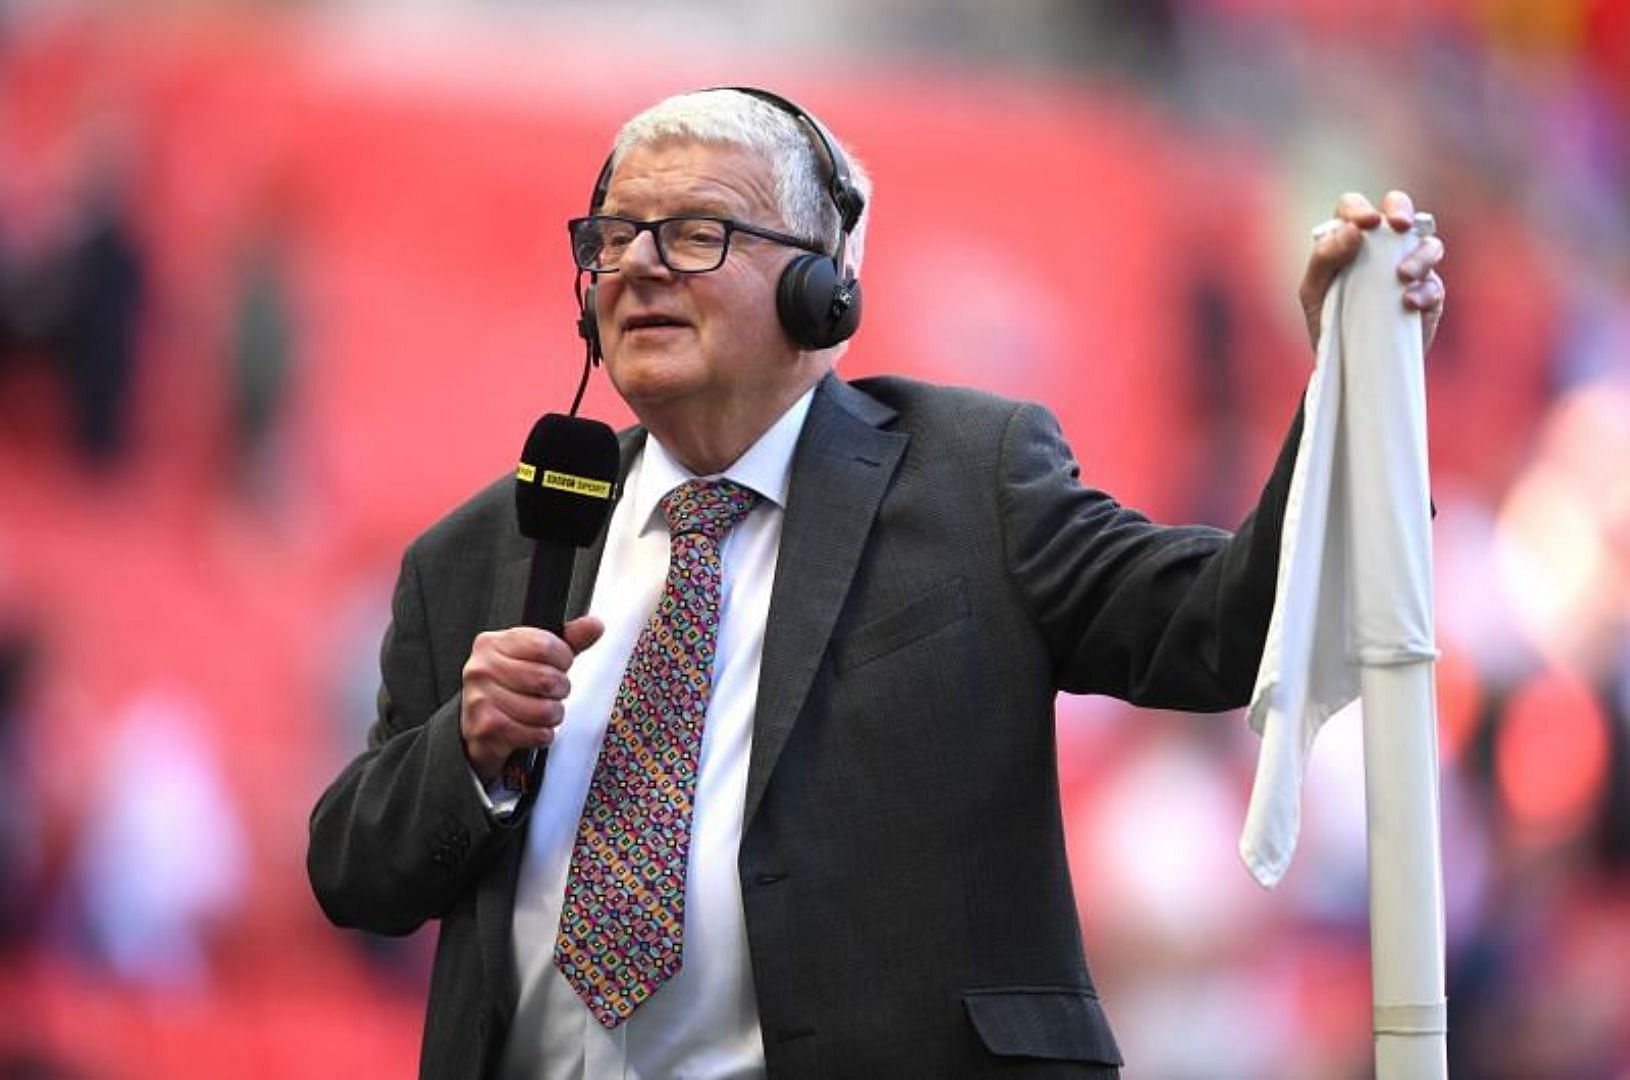 John Motson is a classic commentator, well-remembered by long-time watchers of the game.